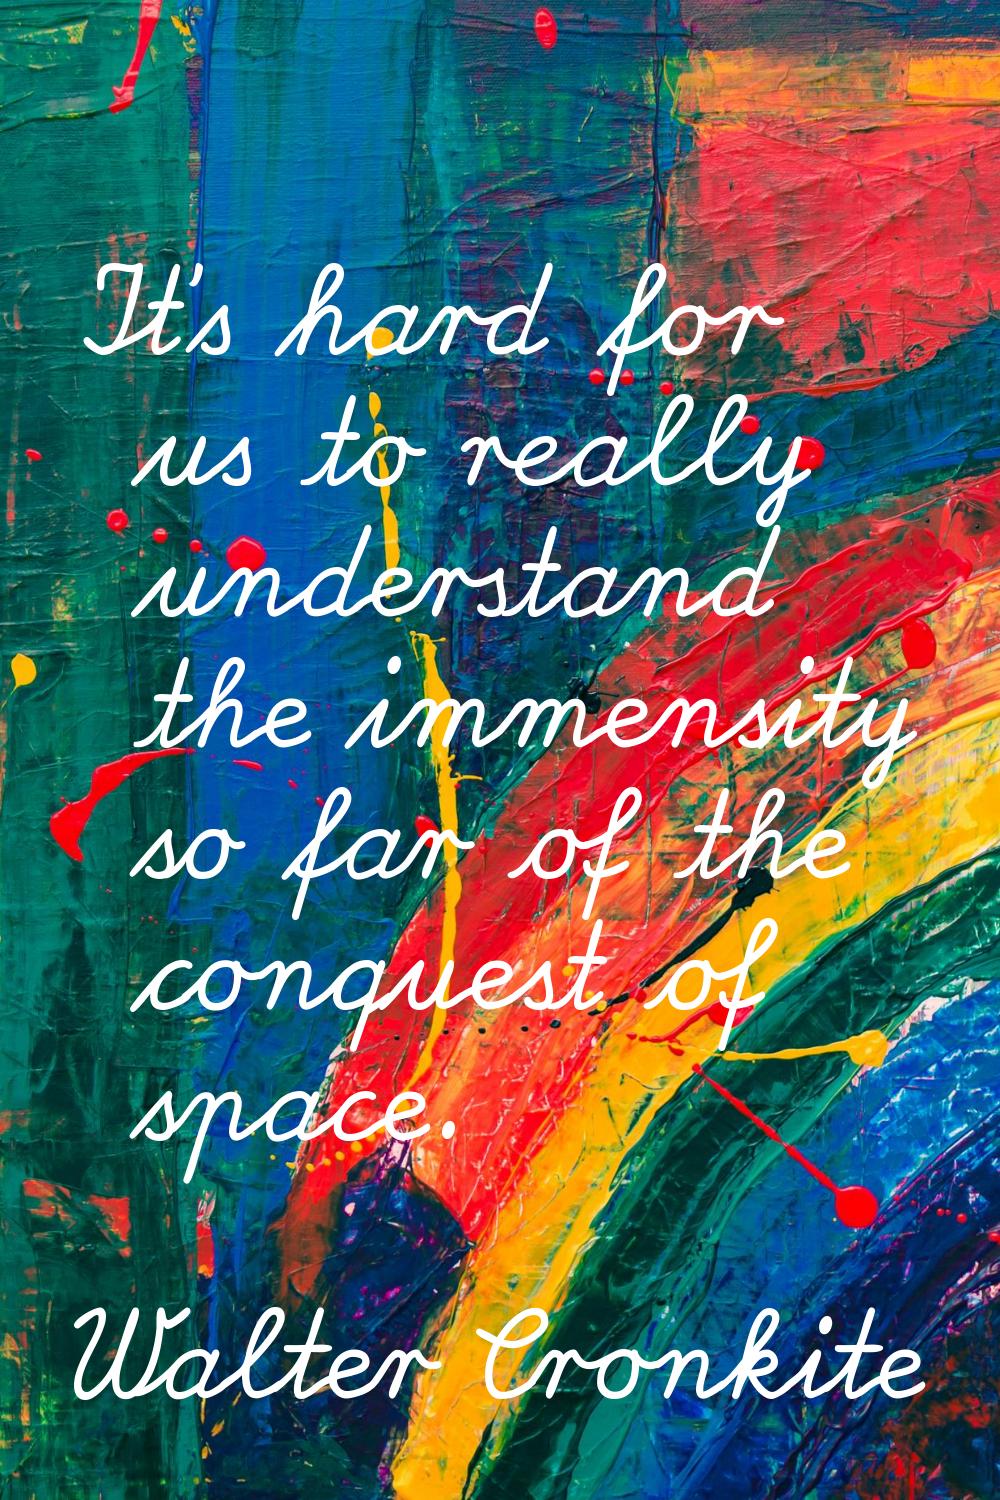 It's hard for us to really understand the immensity so far of the conquest of space.